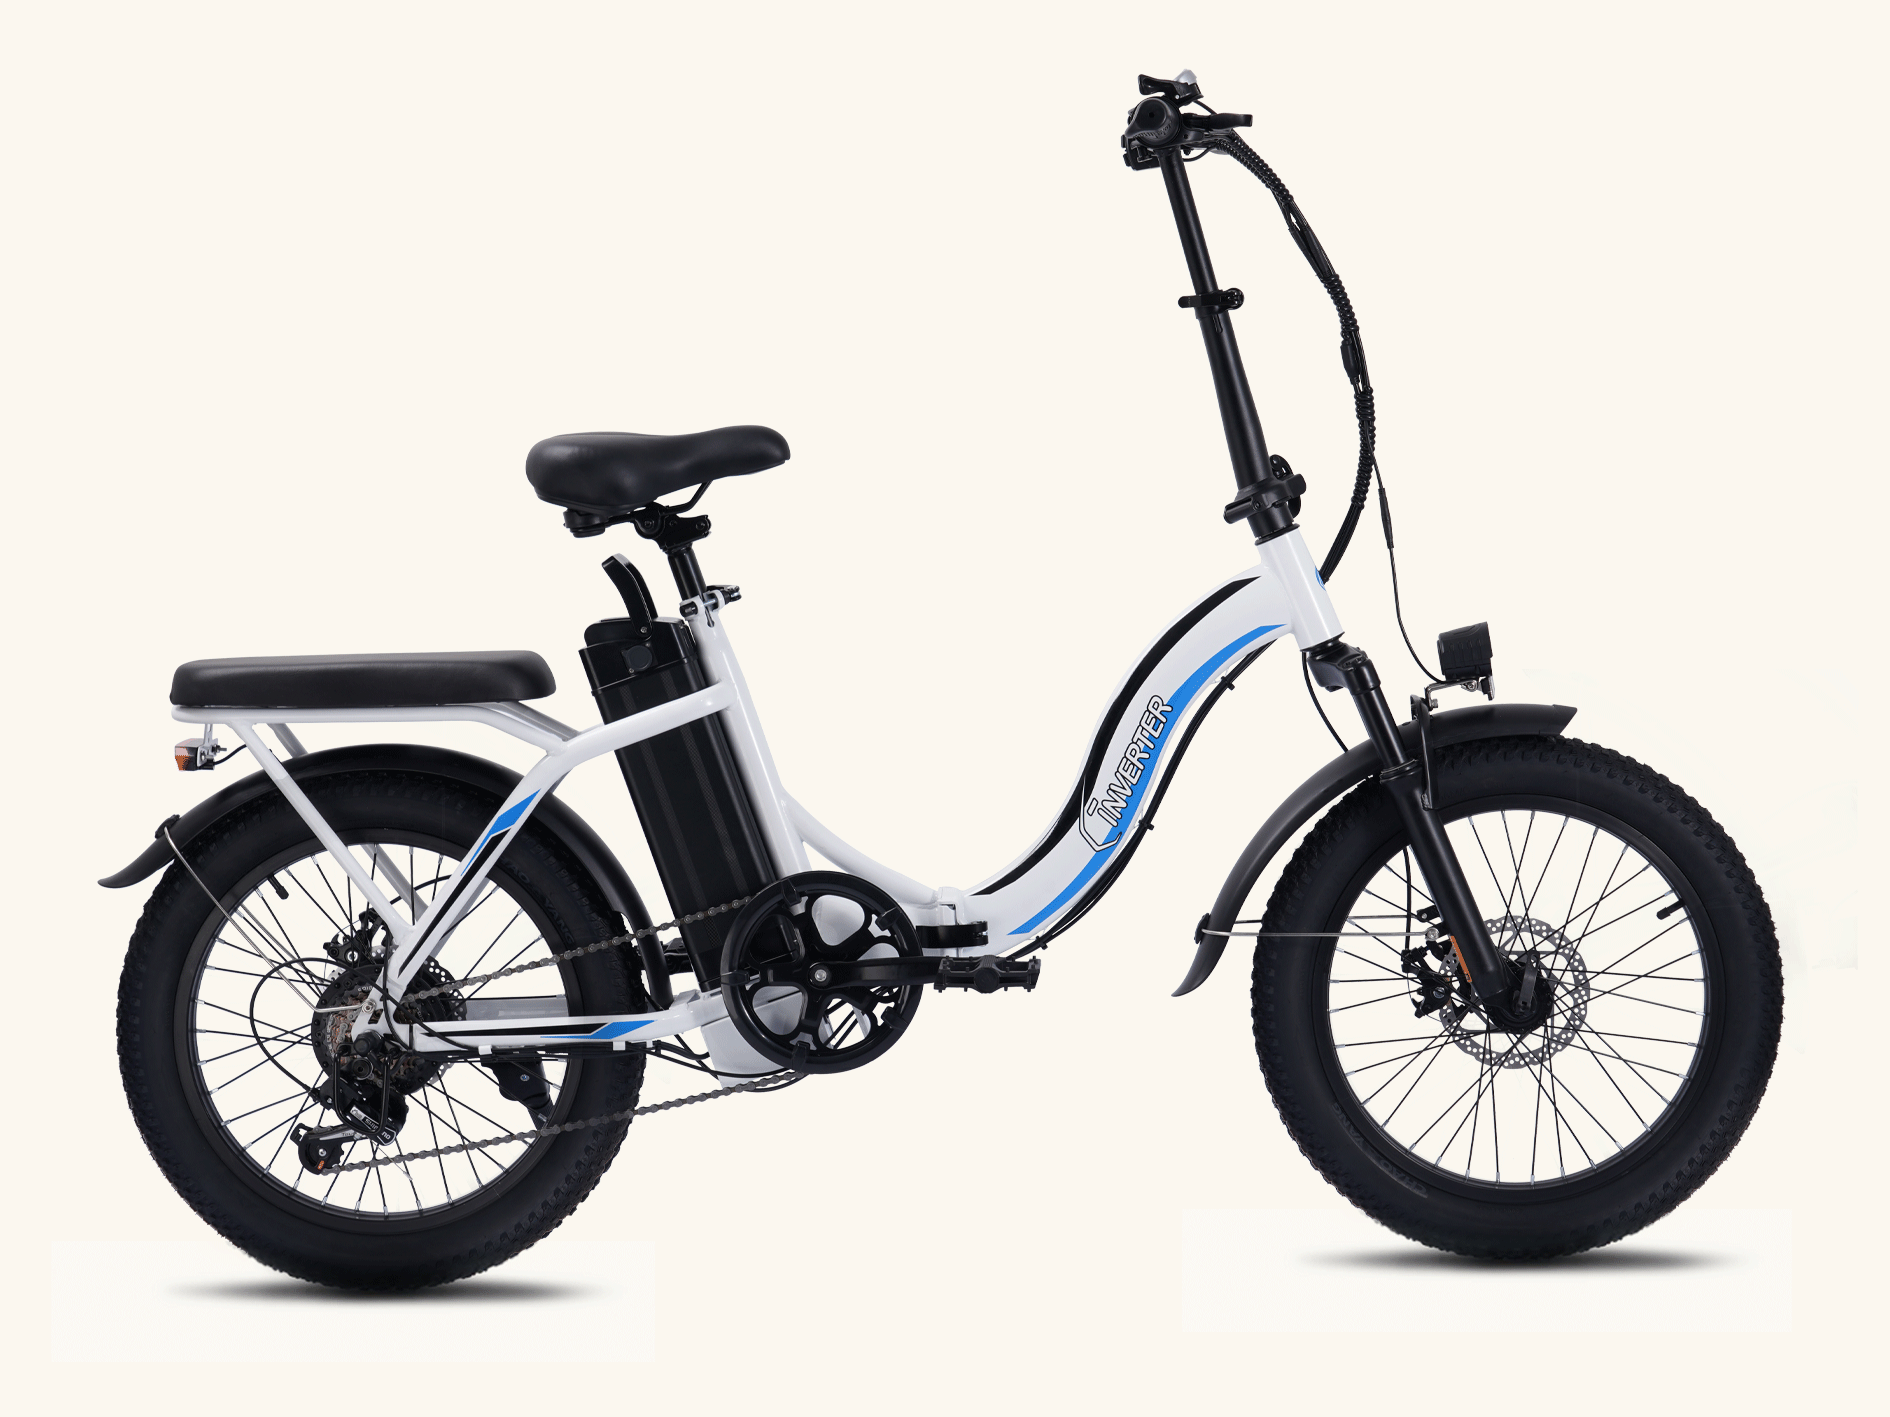 C INVERTER GEMINI 20" X 3.0 Fat Tire Electric Bike, 11.6Ah 36V Battery Folding E Bike, Max.Range 20-55 Miles, 20 MPH Max Speed Electric Bicycle for Teenager Adults